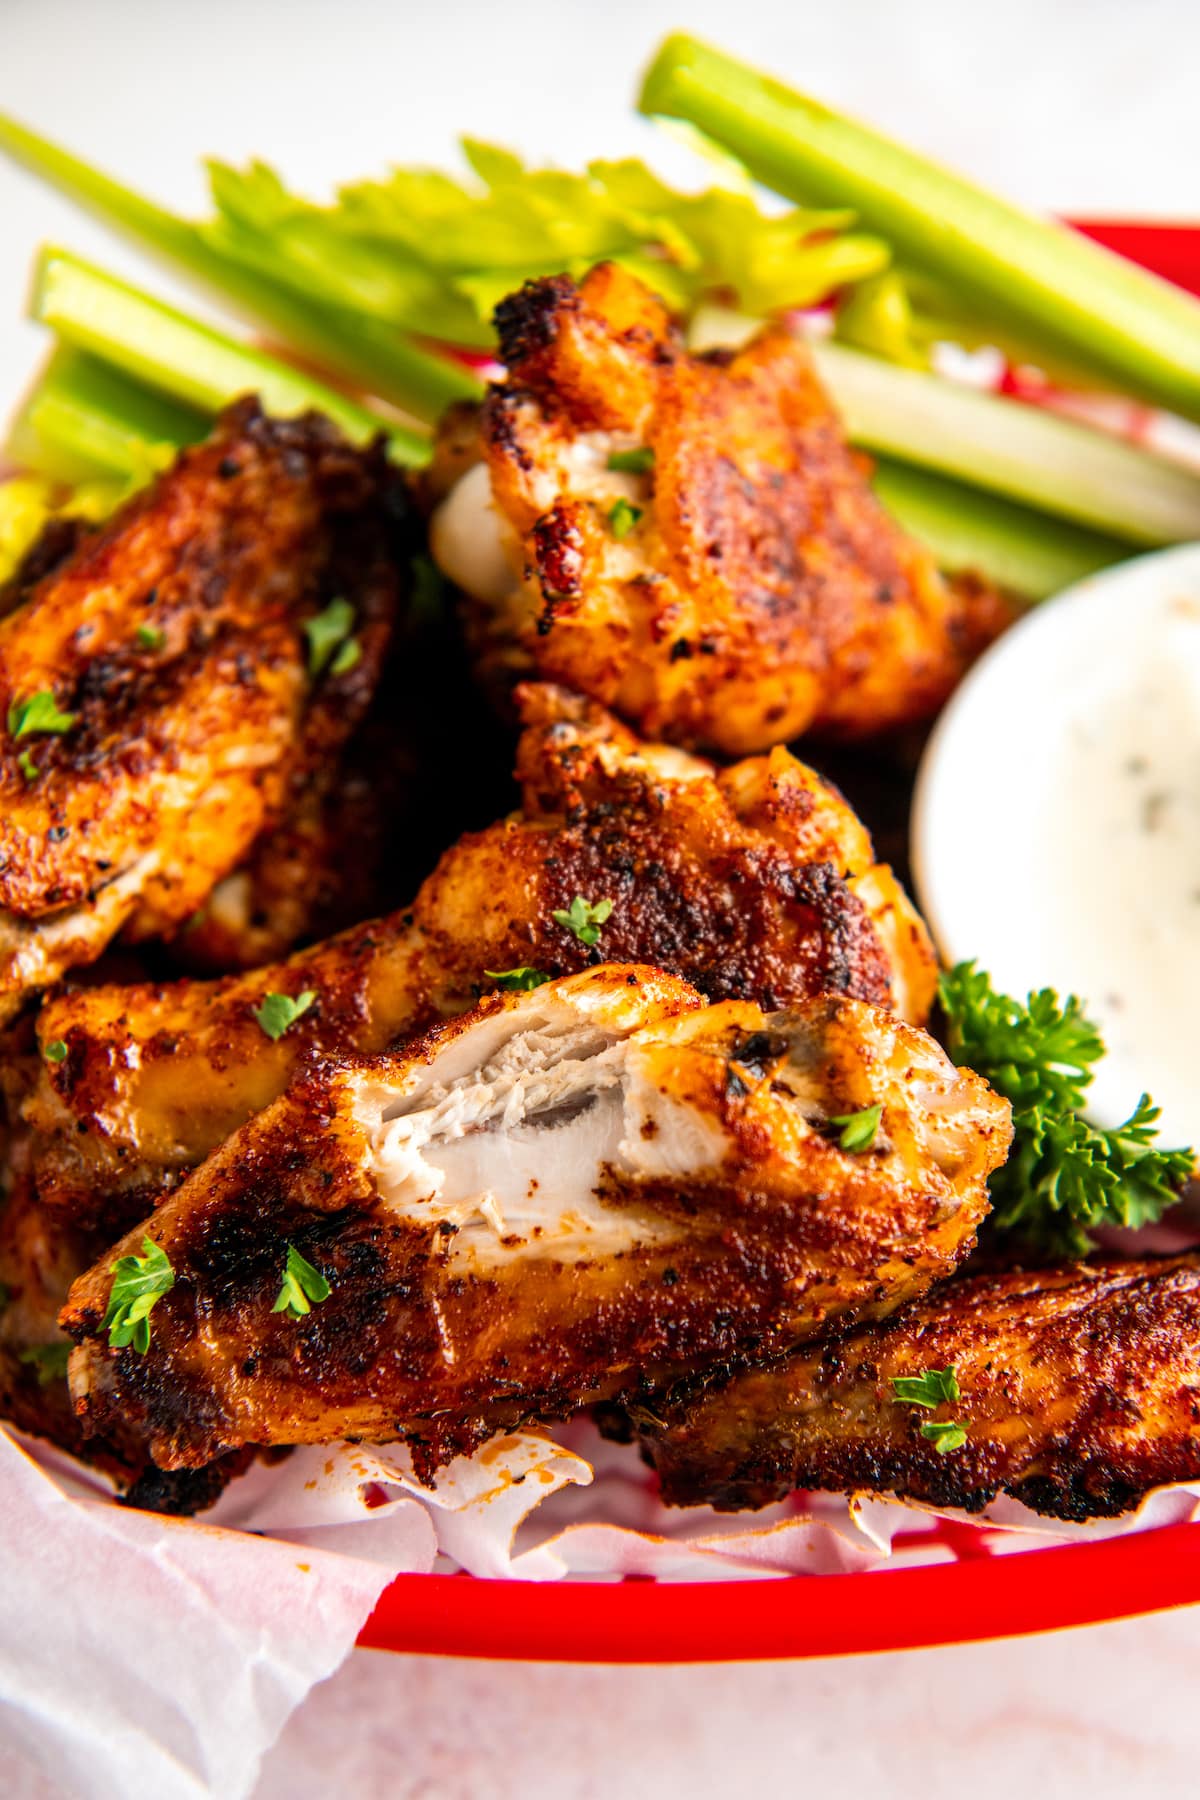 A plate with oven baked chicken wings, one which has a bite taken out of it, celery, and a bowl of ranch.